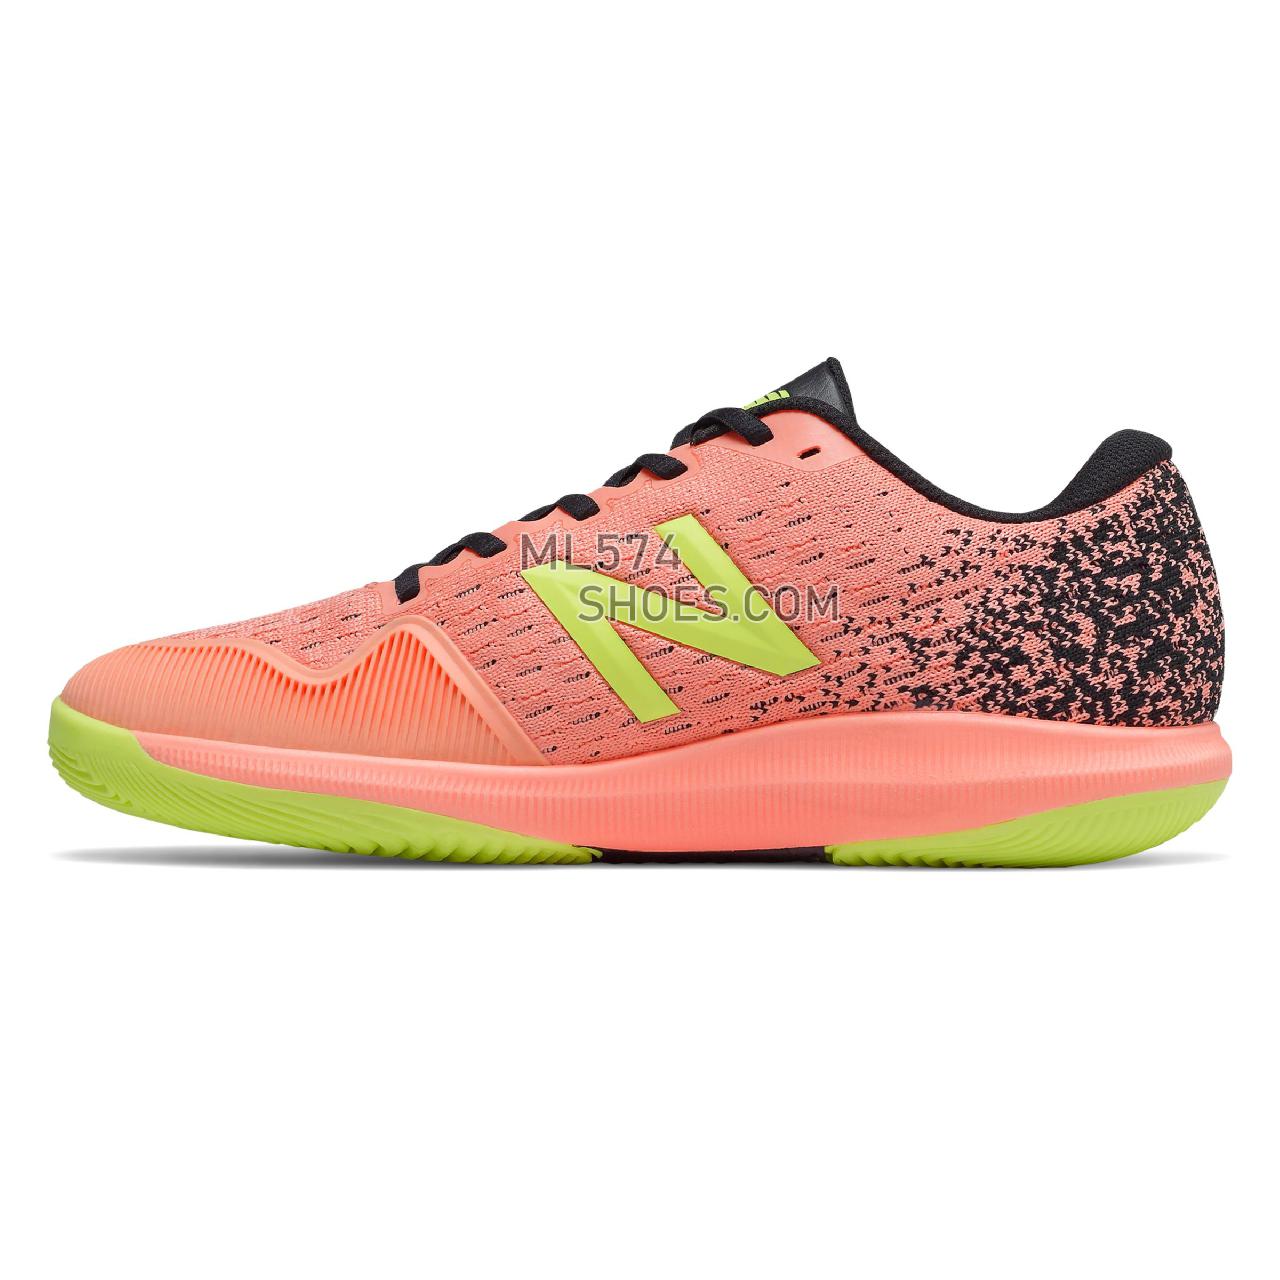 New Balance FuelCell 996v4 - Men's Tennis - Ginger Pink with Black and Hi Lite - MCH996M4